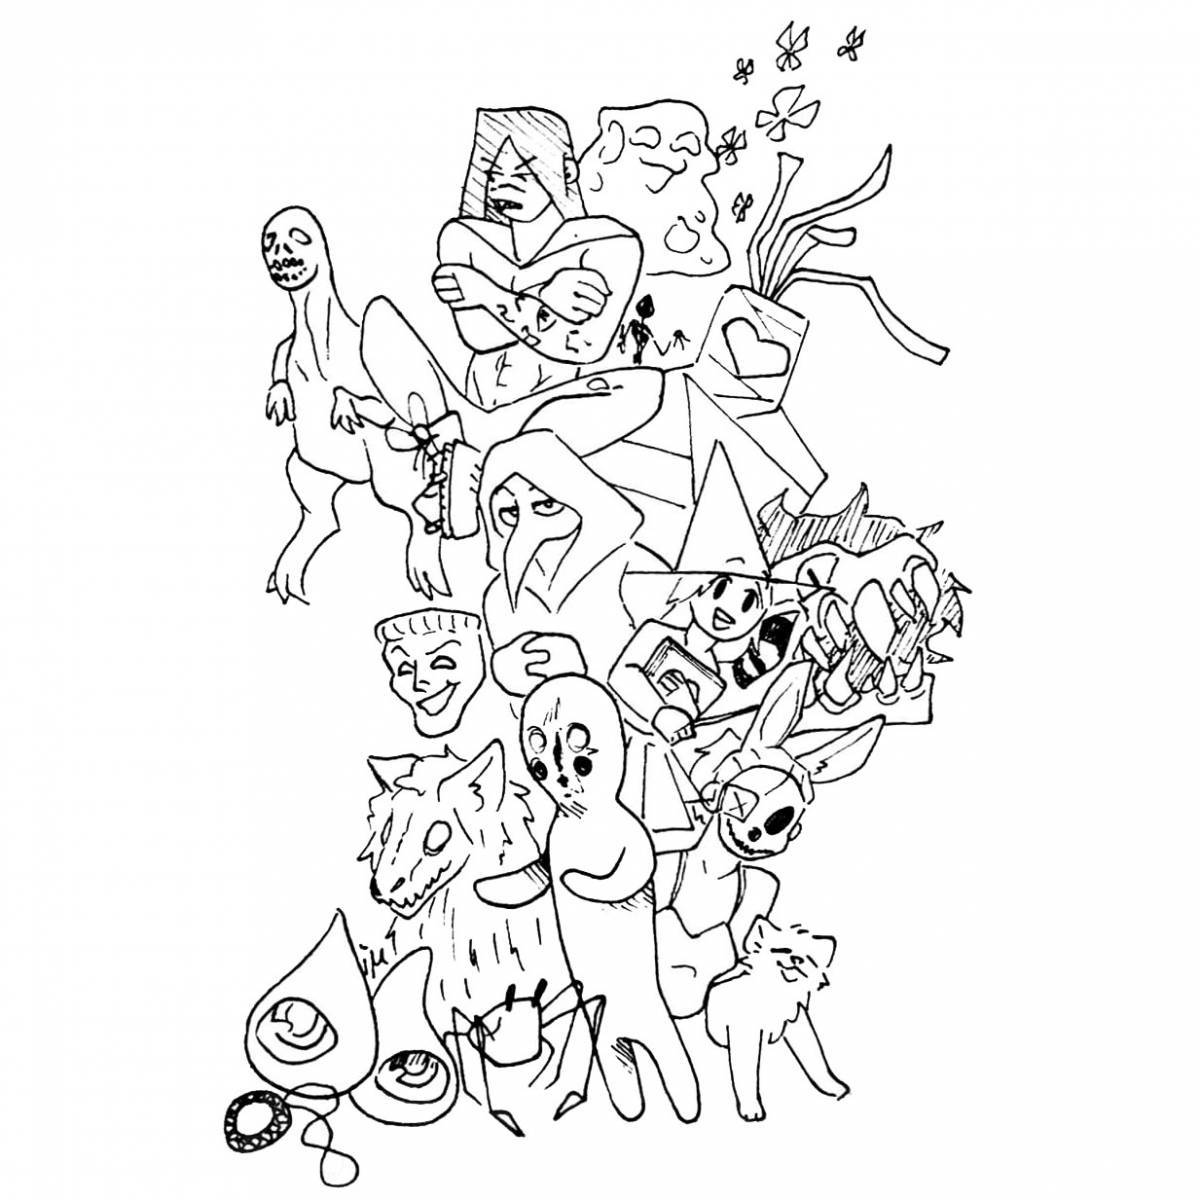 Scp shining coloring page